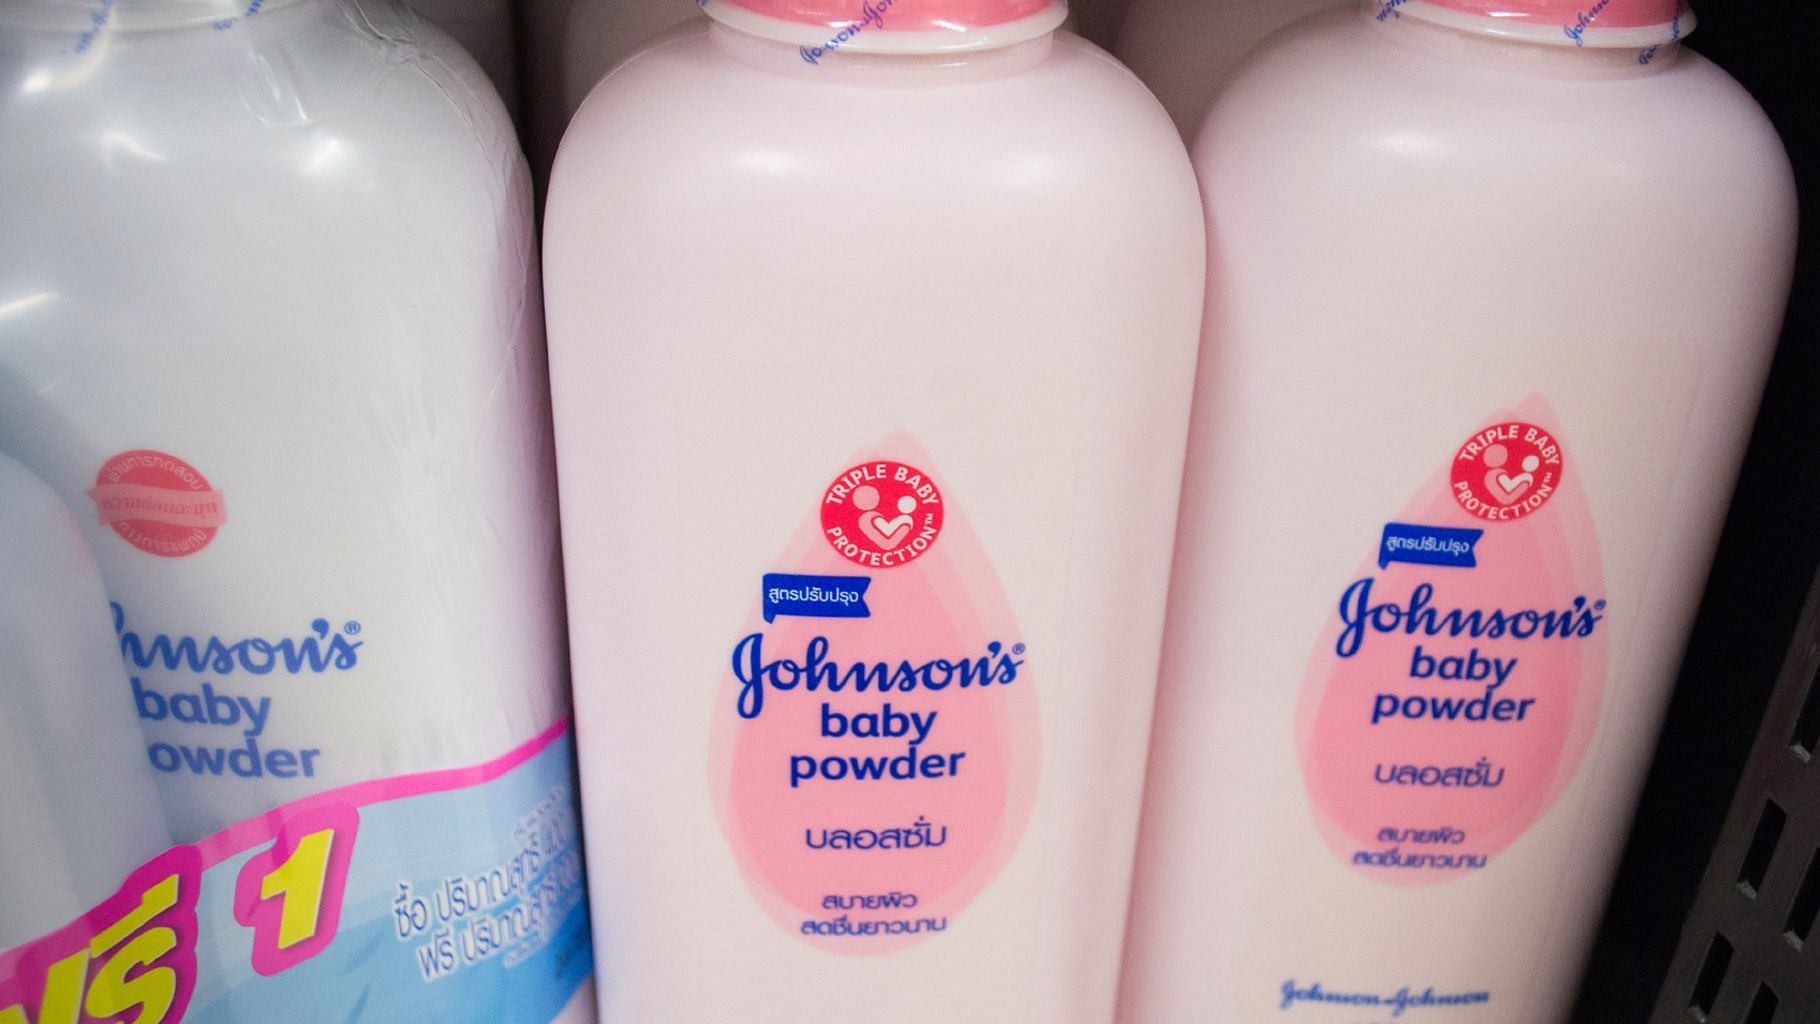 Regulators expand the investigation to assess other J&amp;J products along with its baby powder.&nbsp;